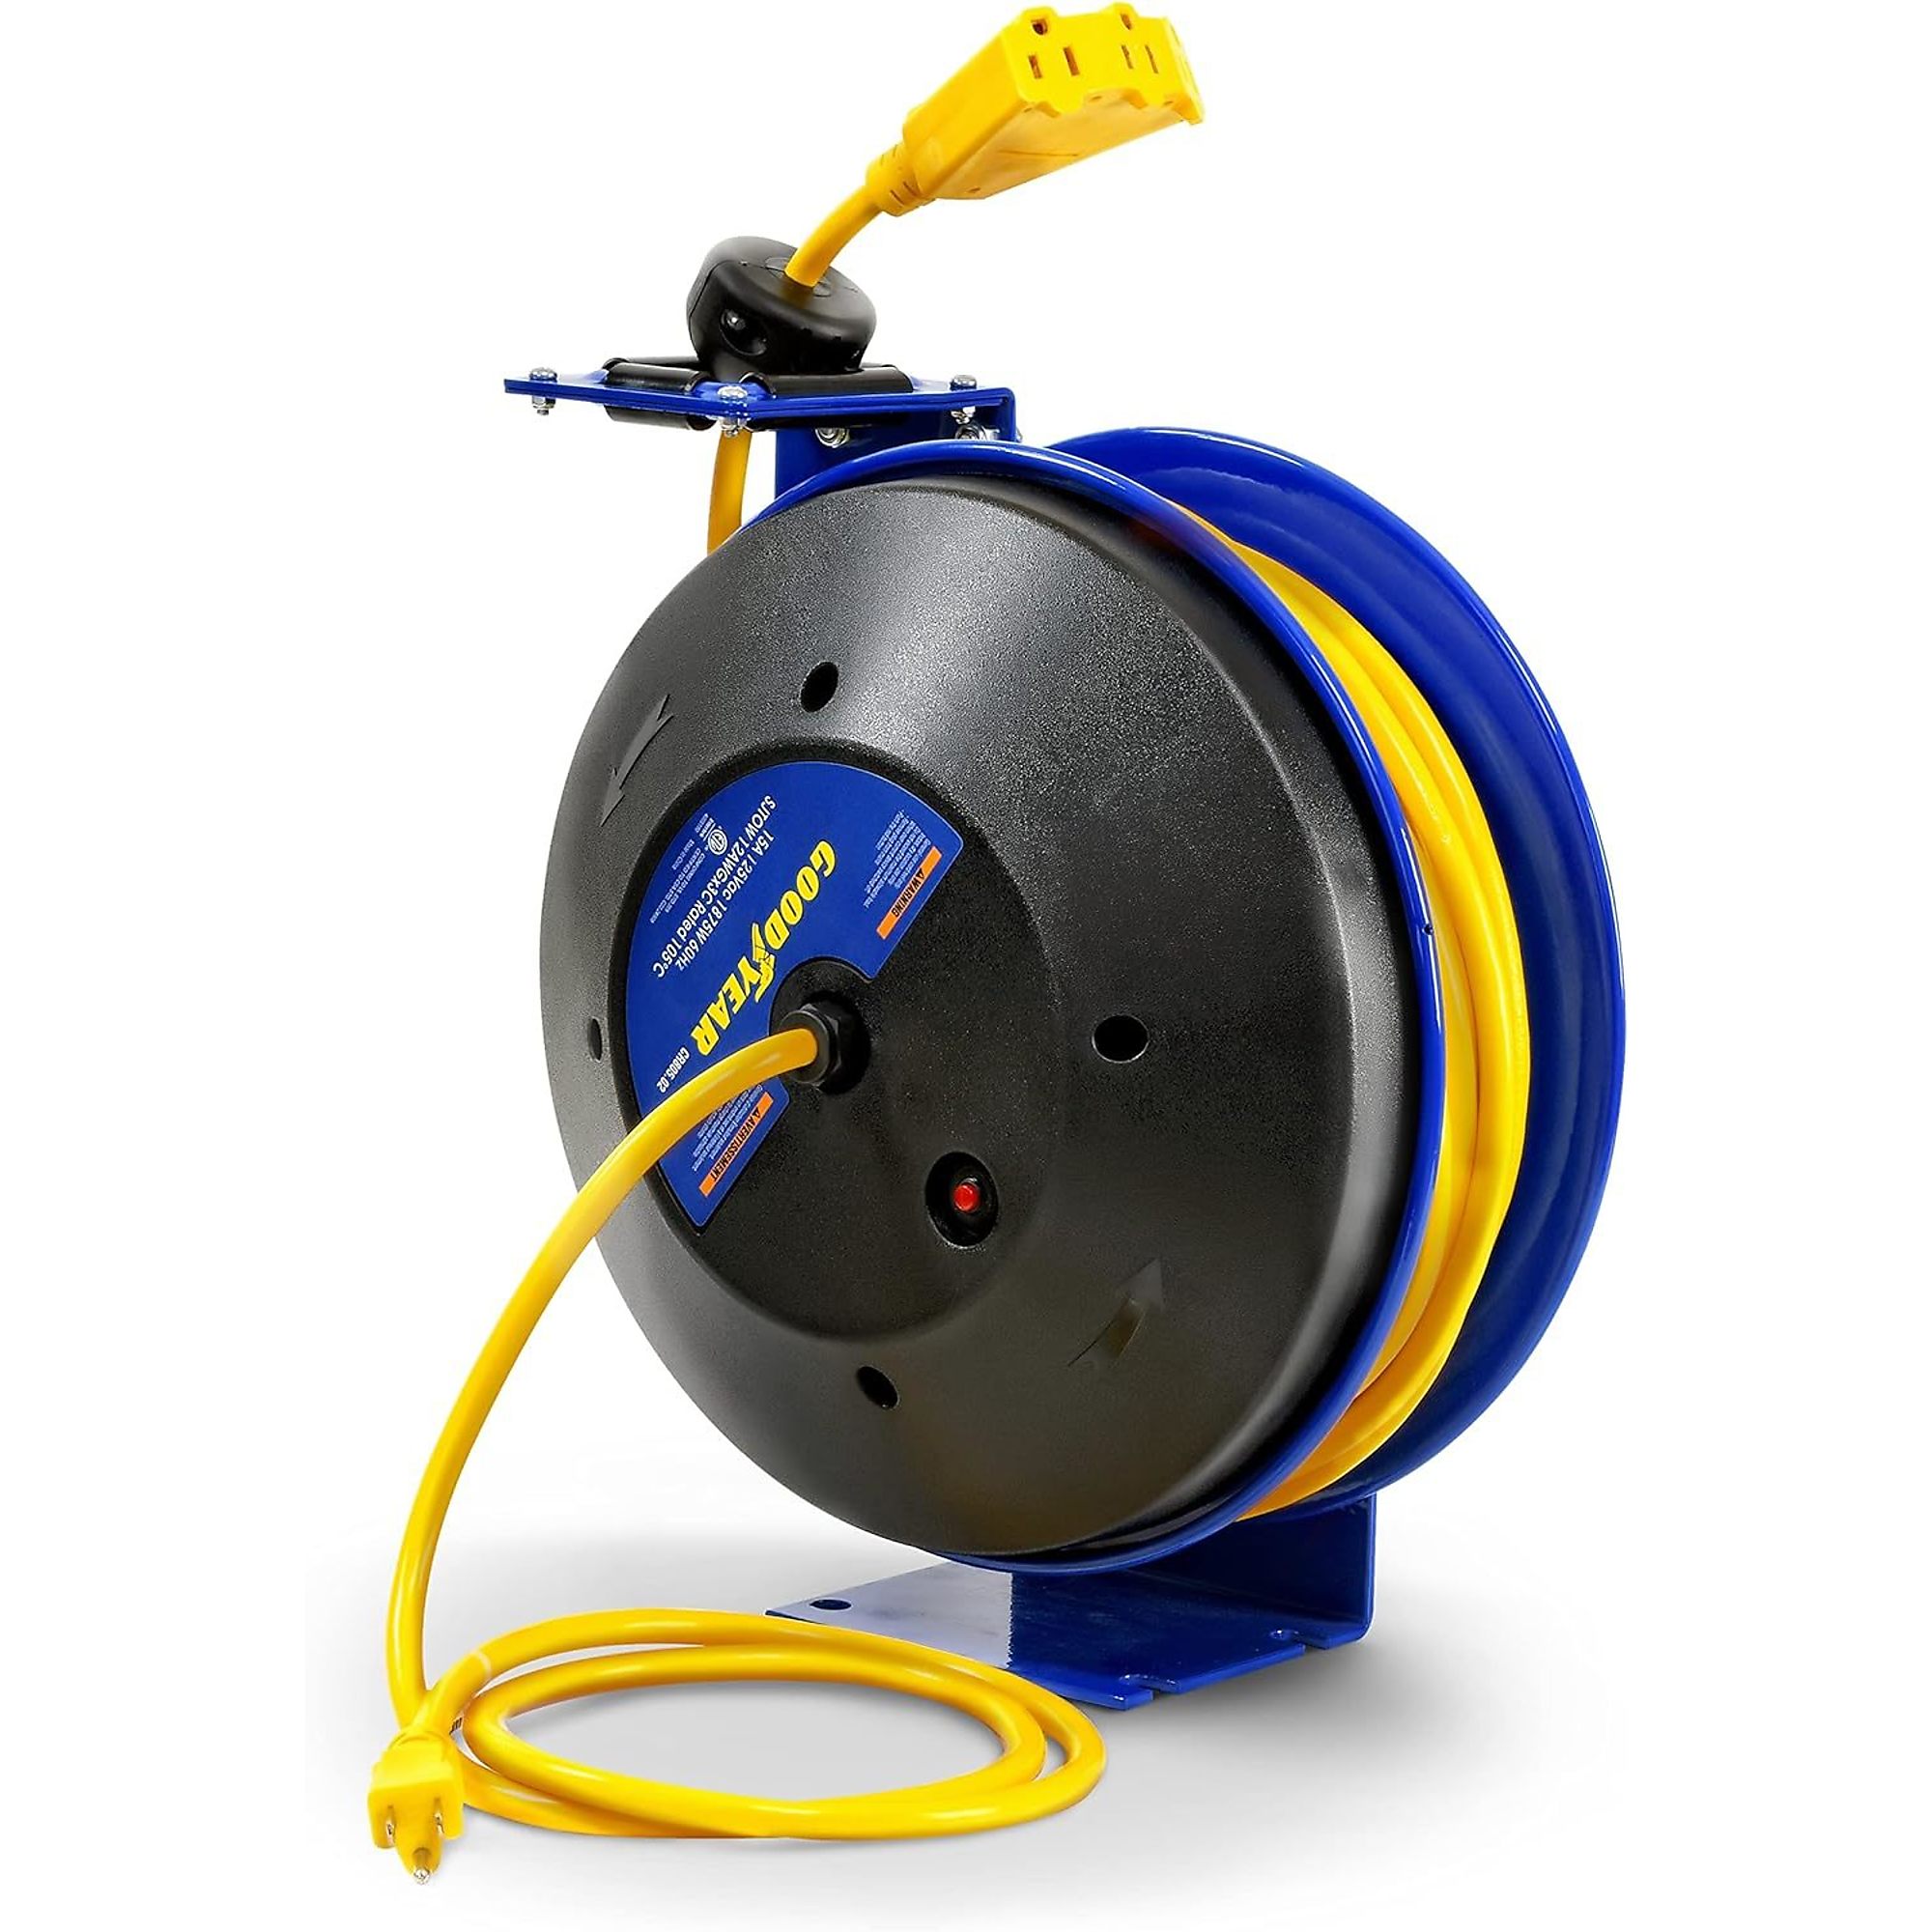 Goodyear GUR074 Retractable Extension Cord Reel Mountable 12AWG x 50' 14A 3-Outlets New